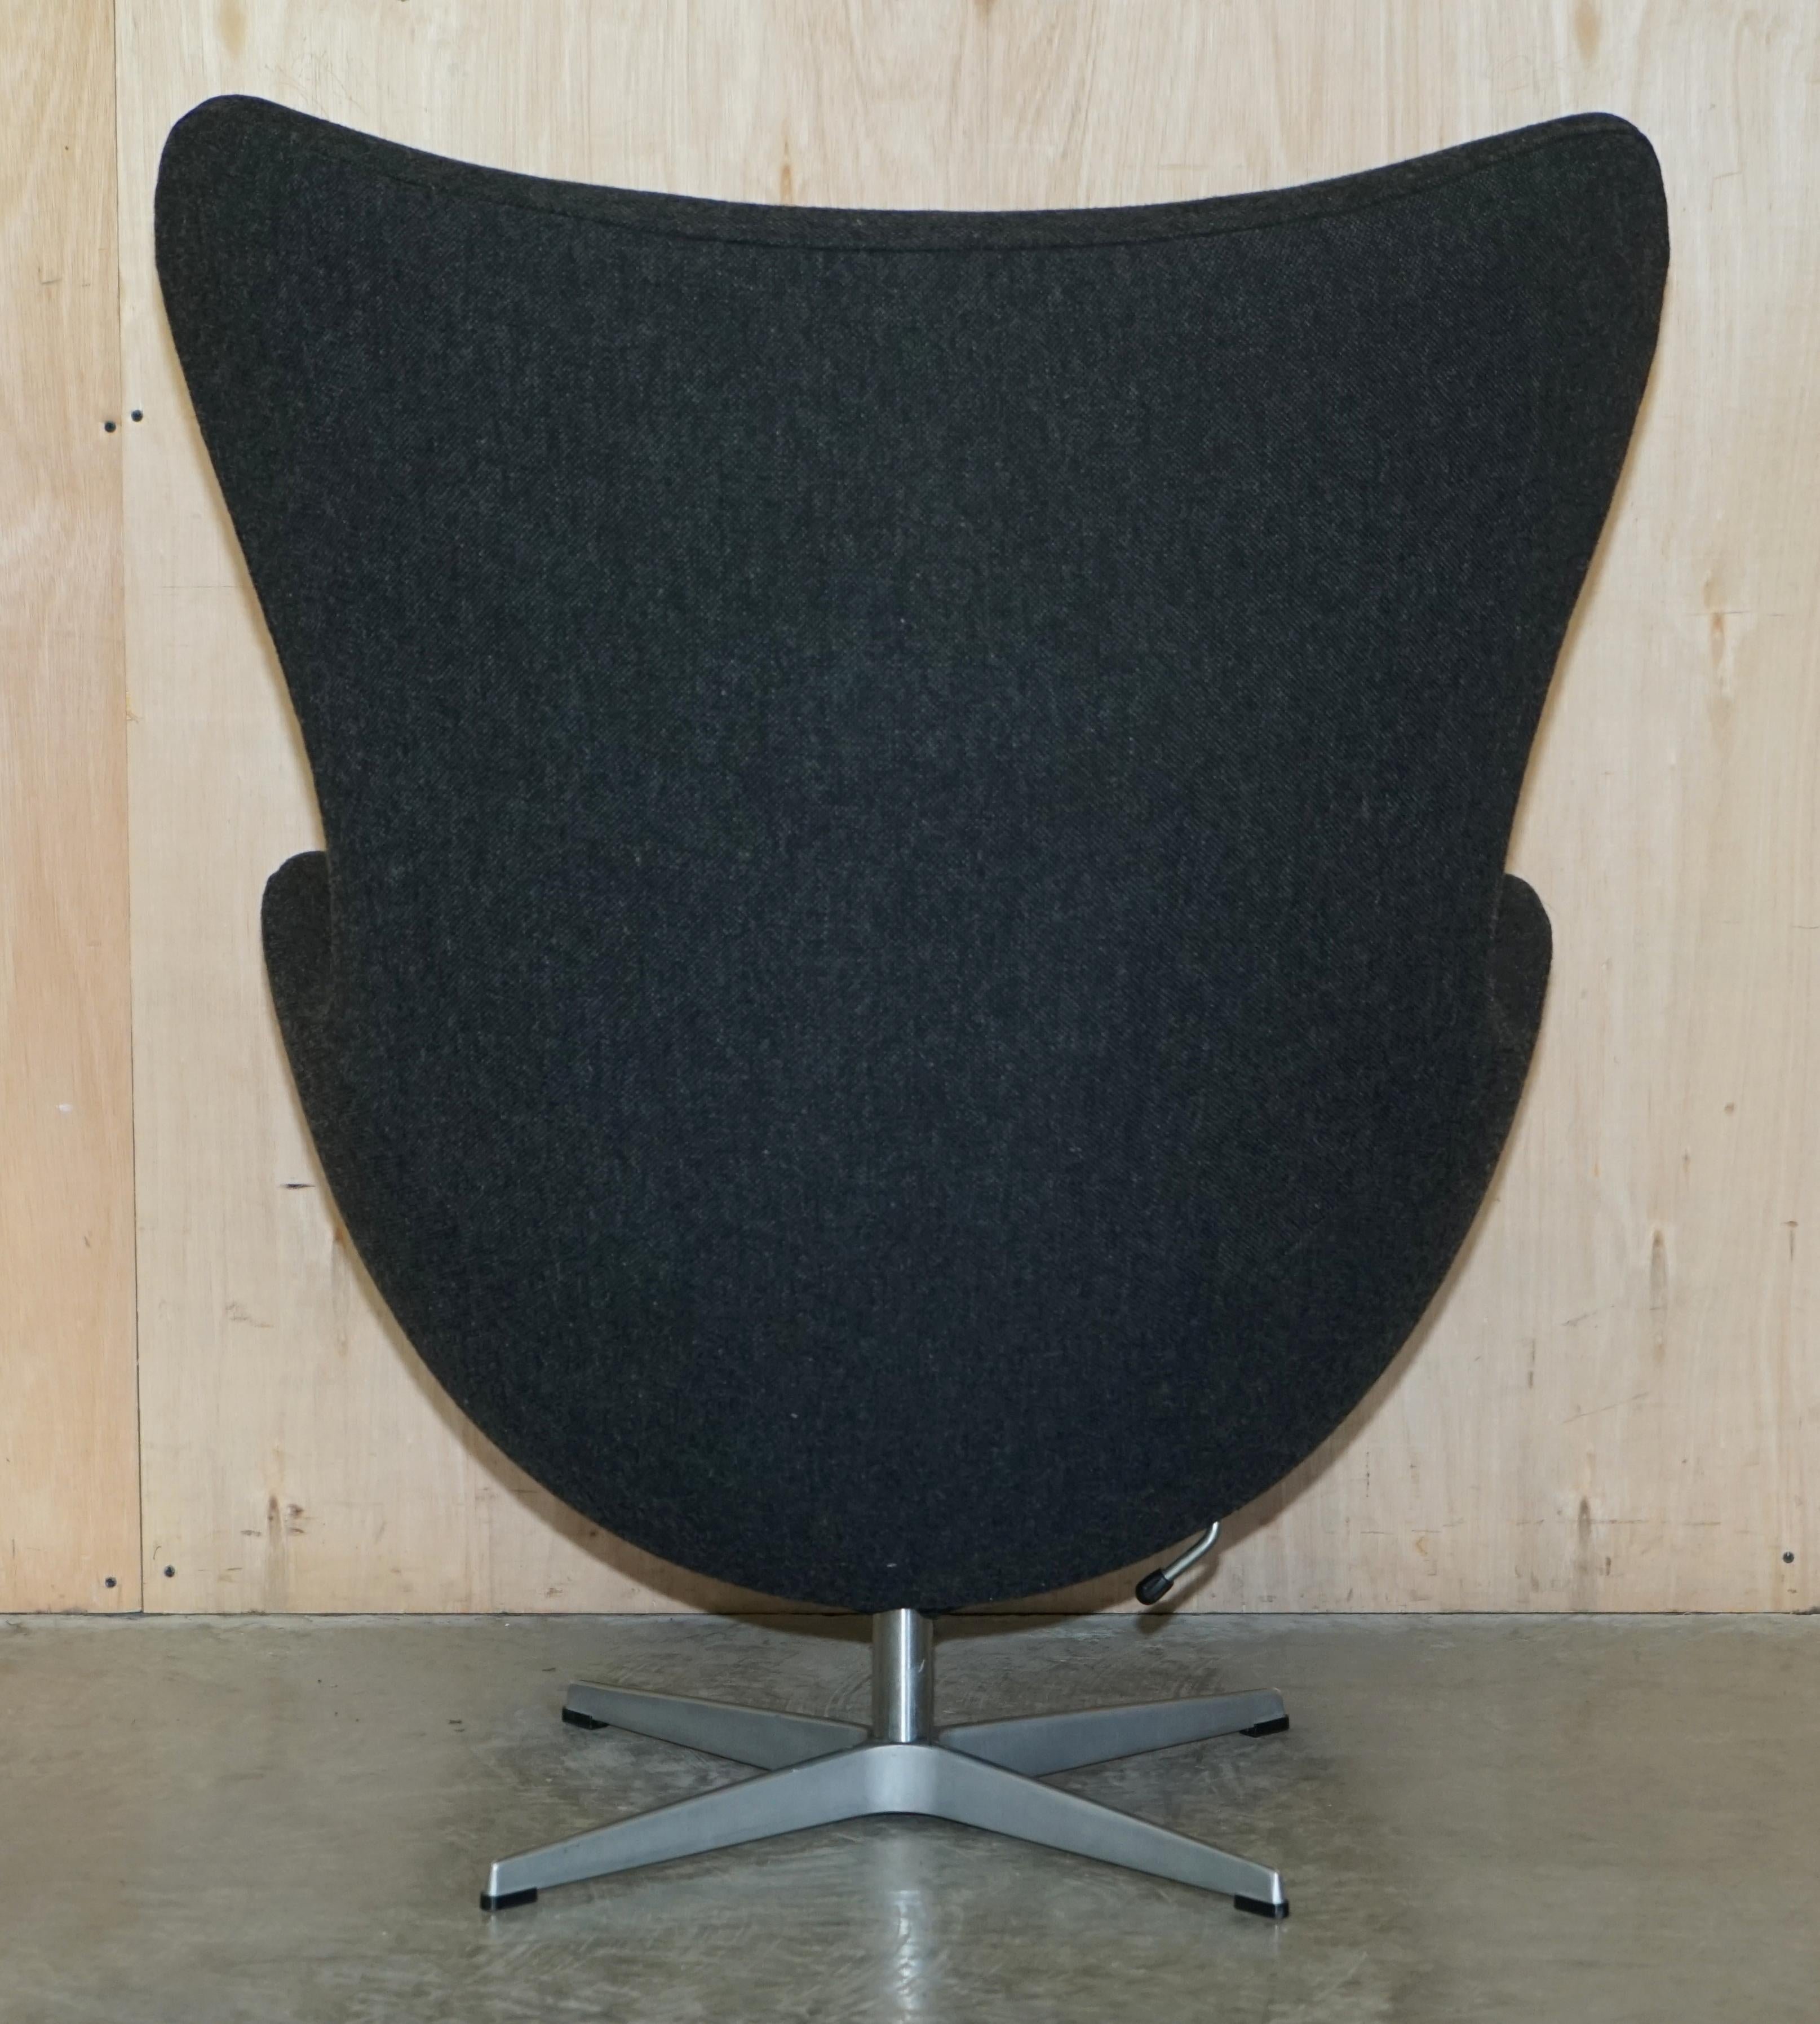 Original 1996 Stamped Fritz Hansen Egg Chair in Black / Grey Fabric For Sale 9